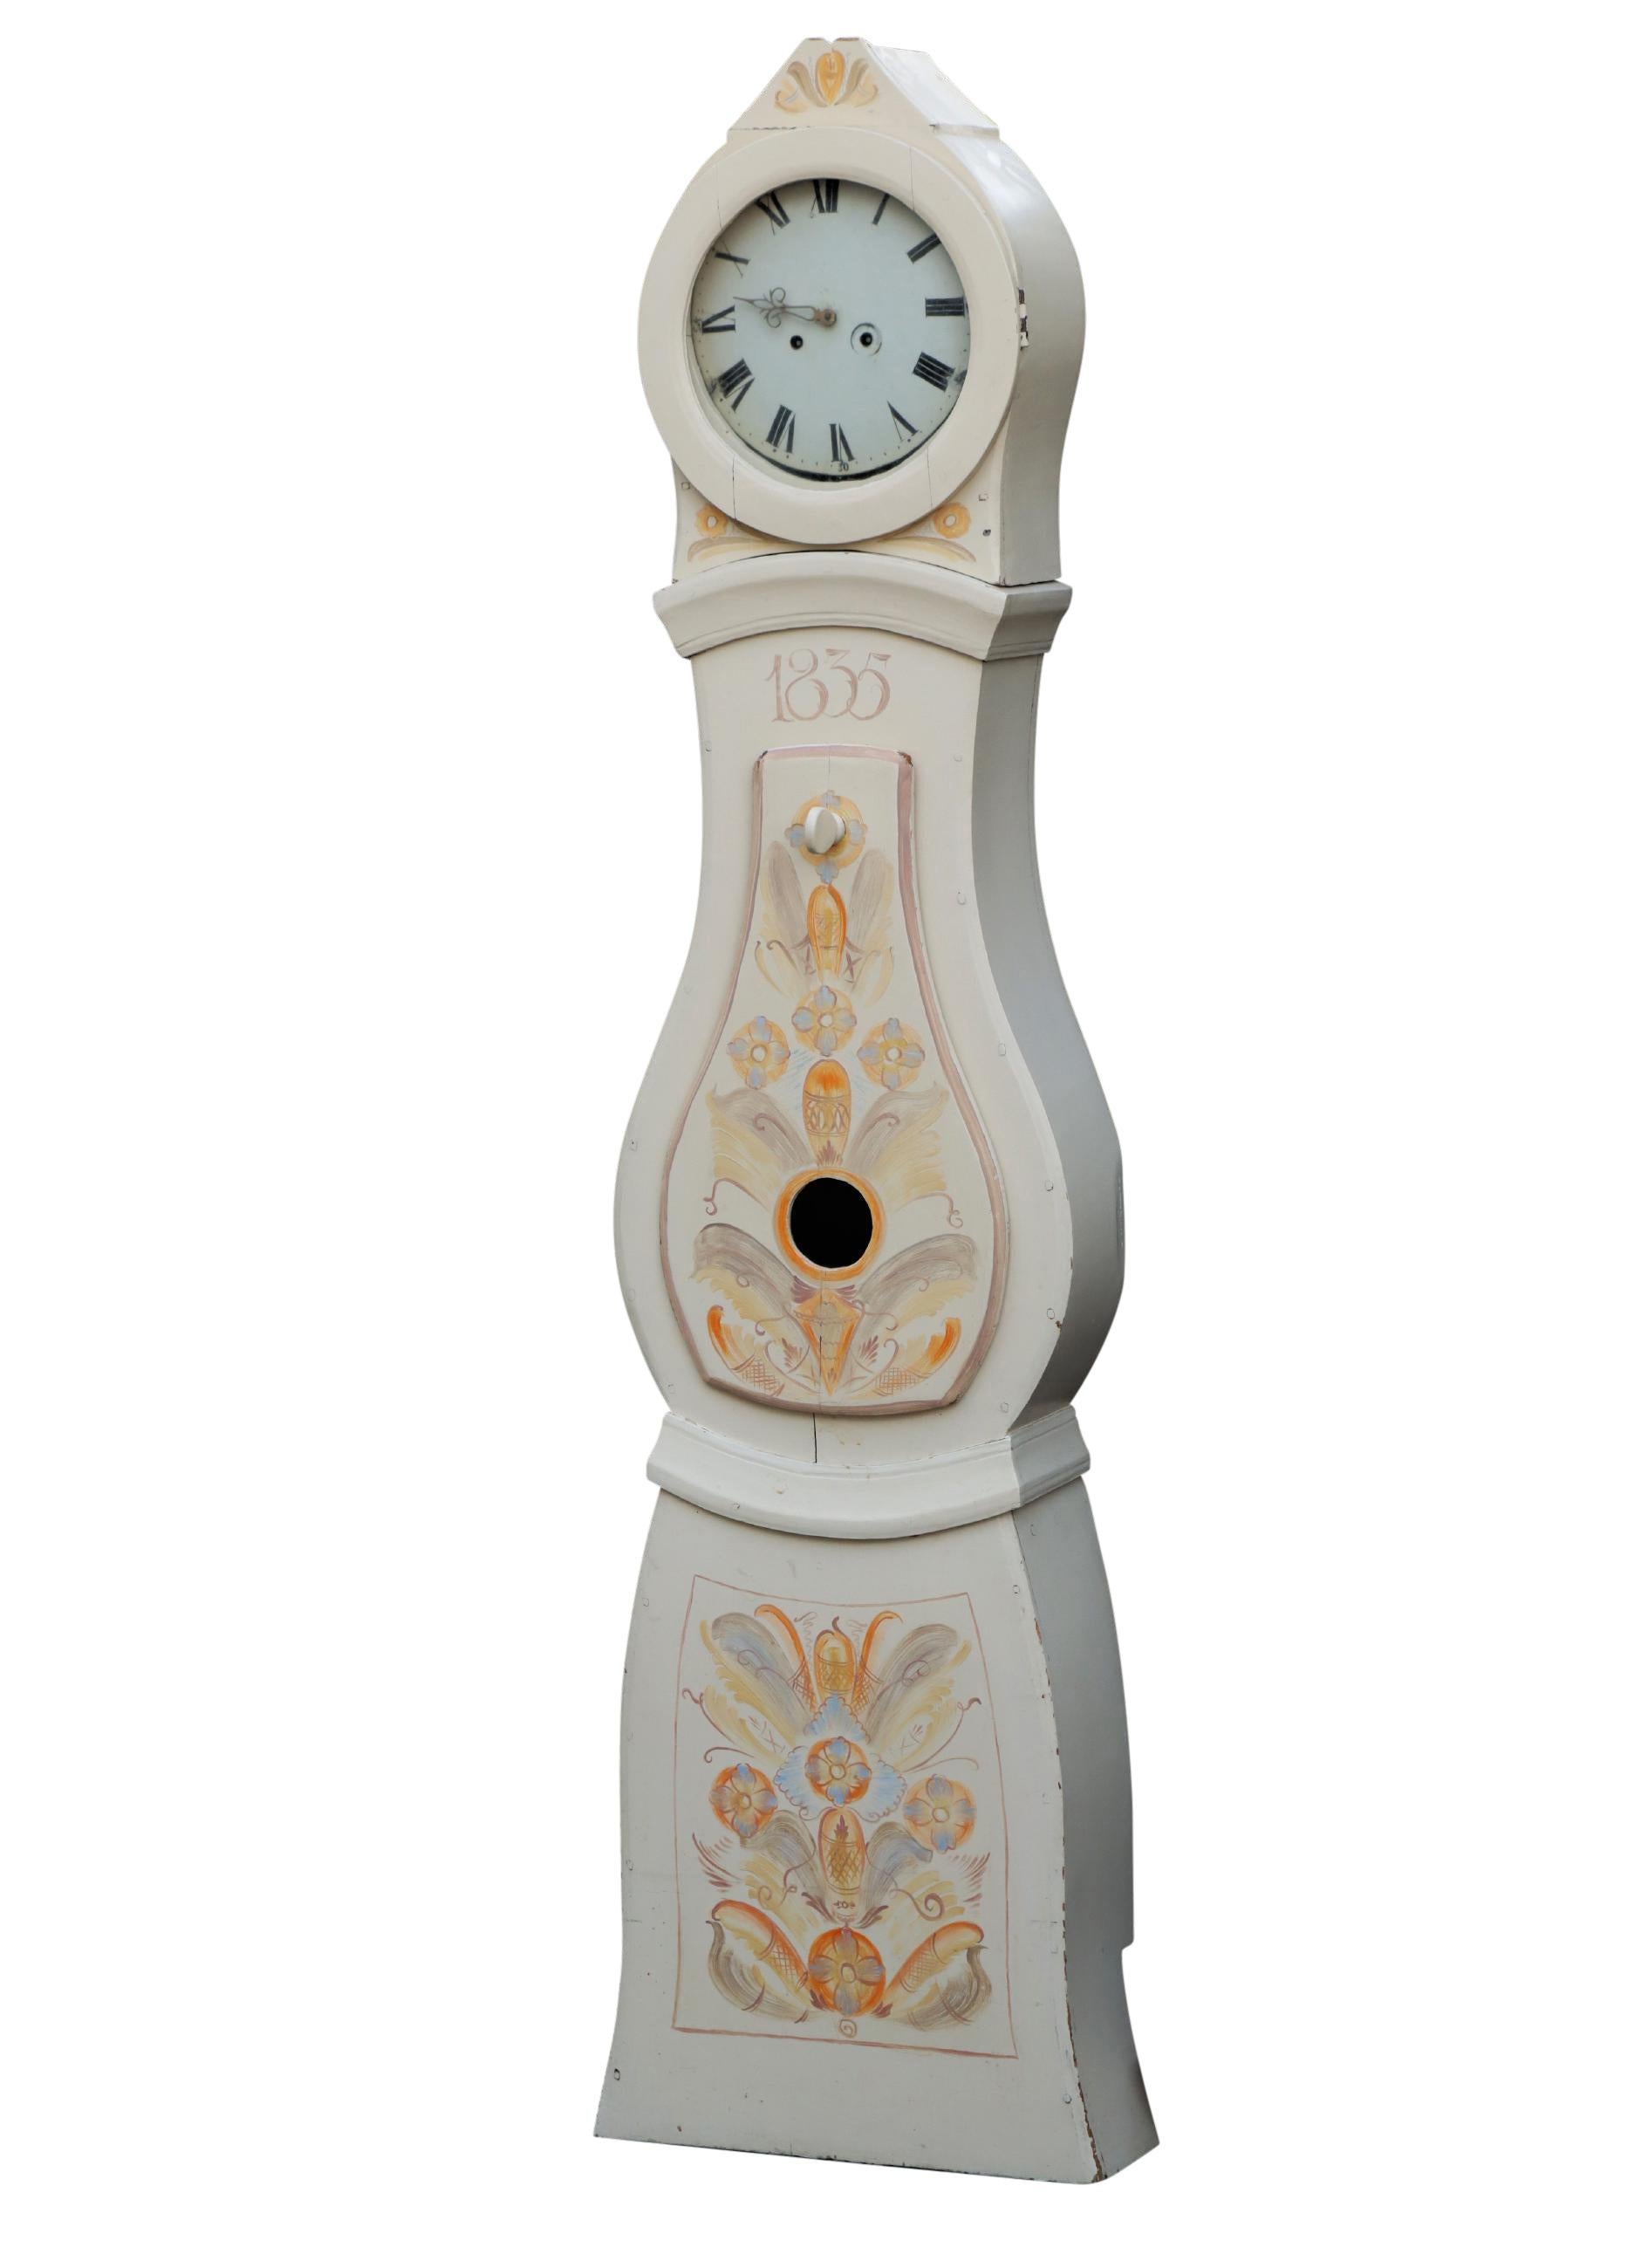 18th. Century Swedish Mora clock with hand painted floral details. Carved detailing of crown. Working Longcase clock mechanism of pendulum and 2 weights and a bell chime on the hour.

Width:52cm / 20.4